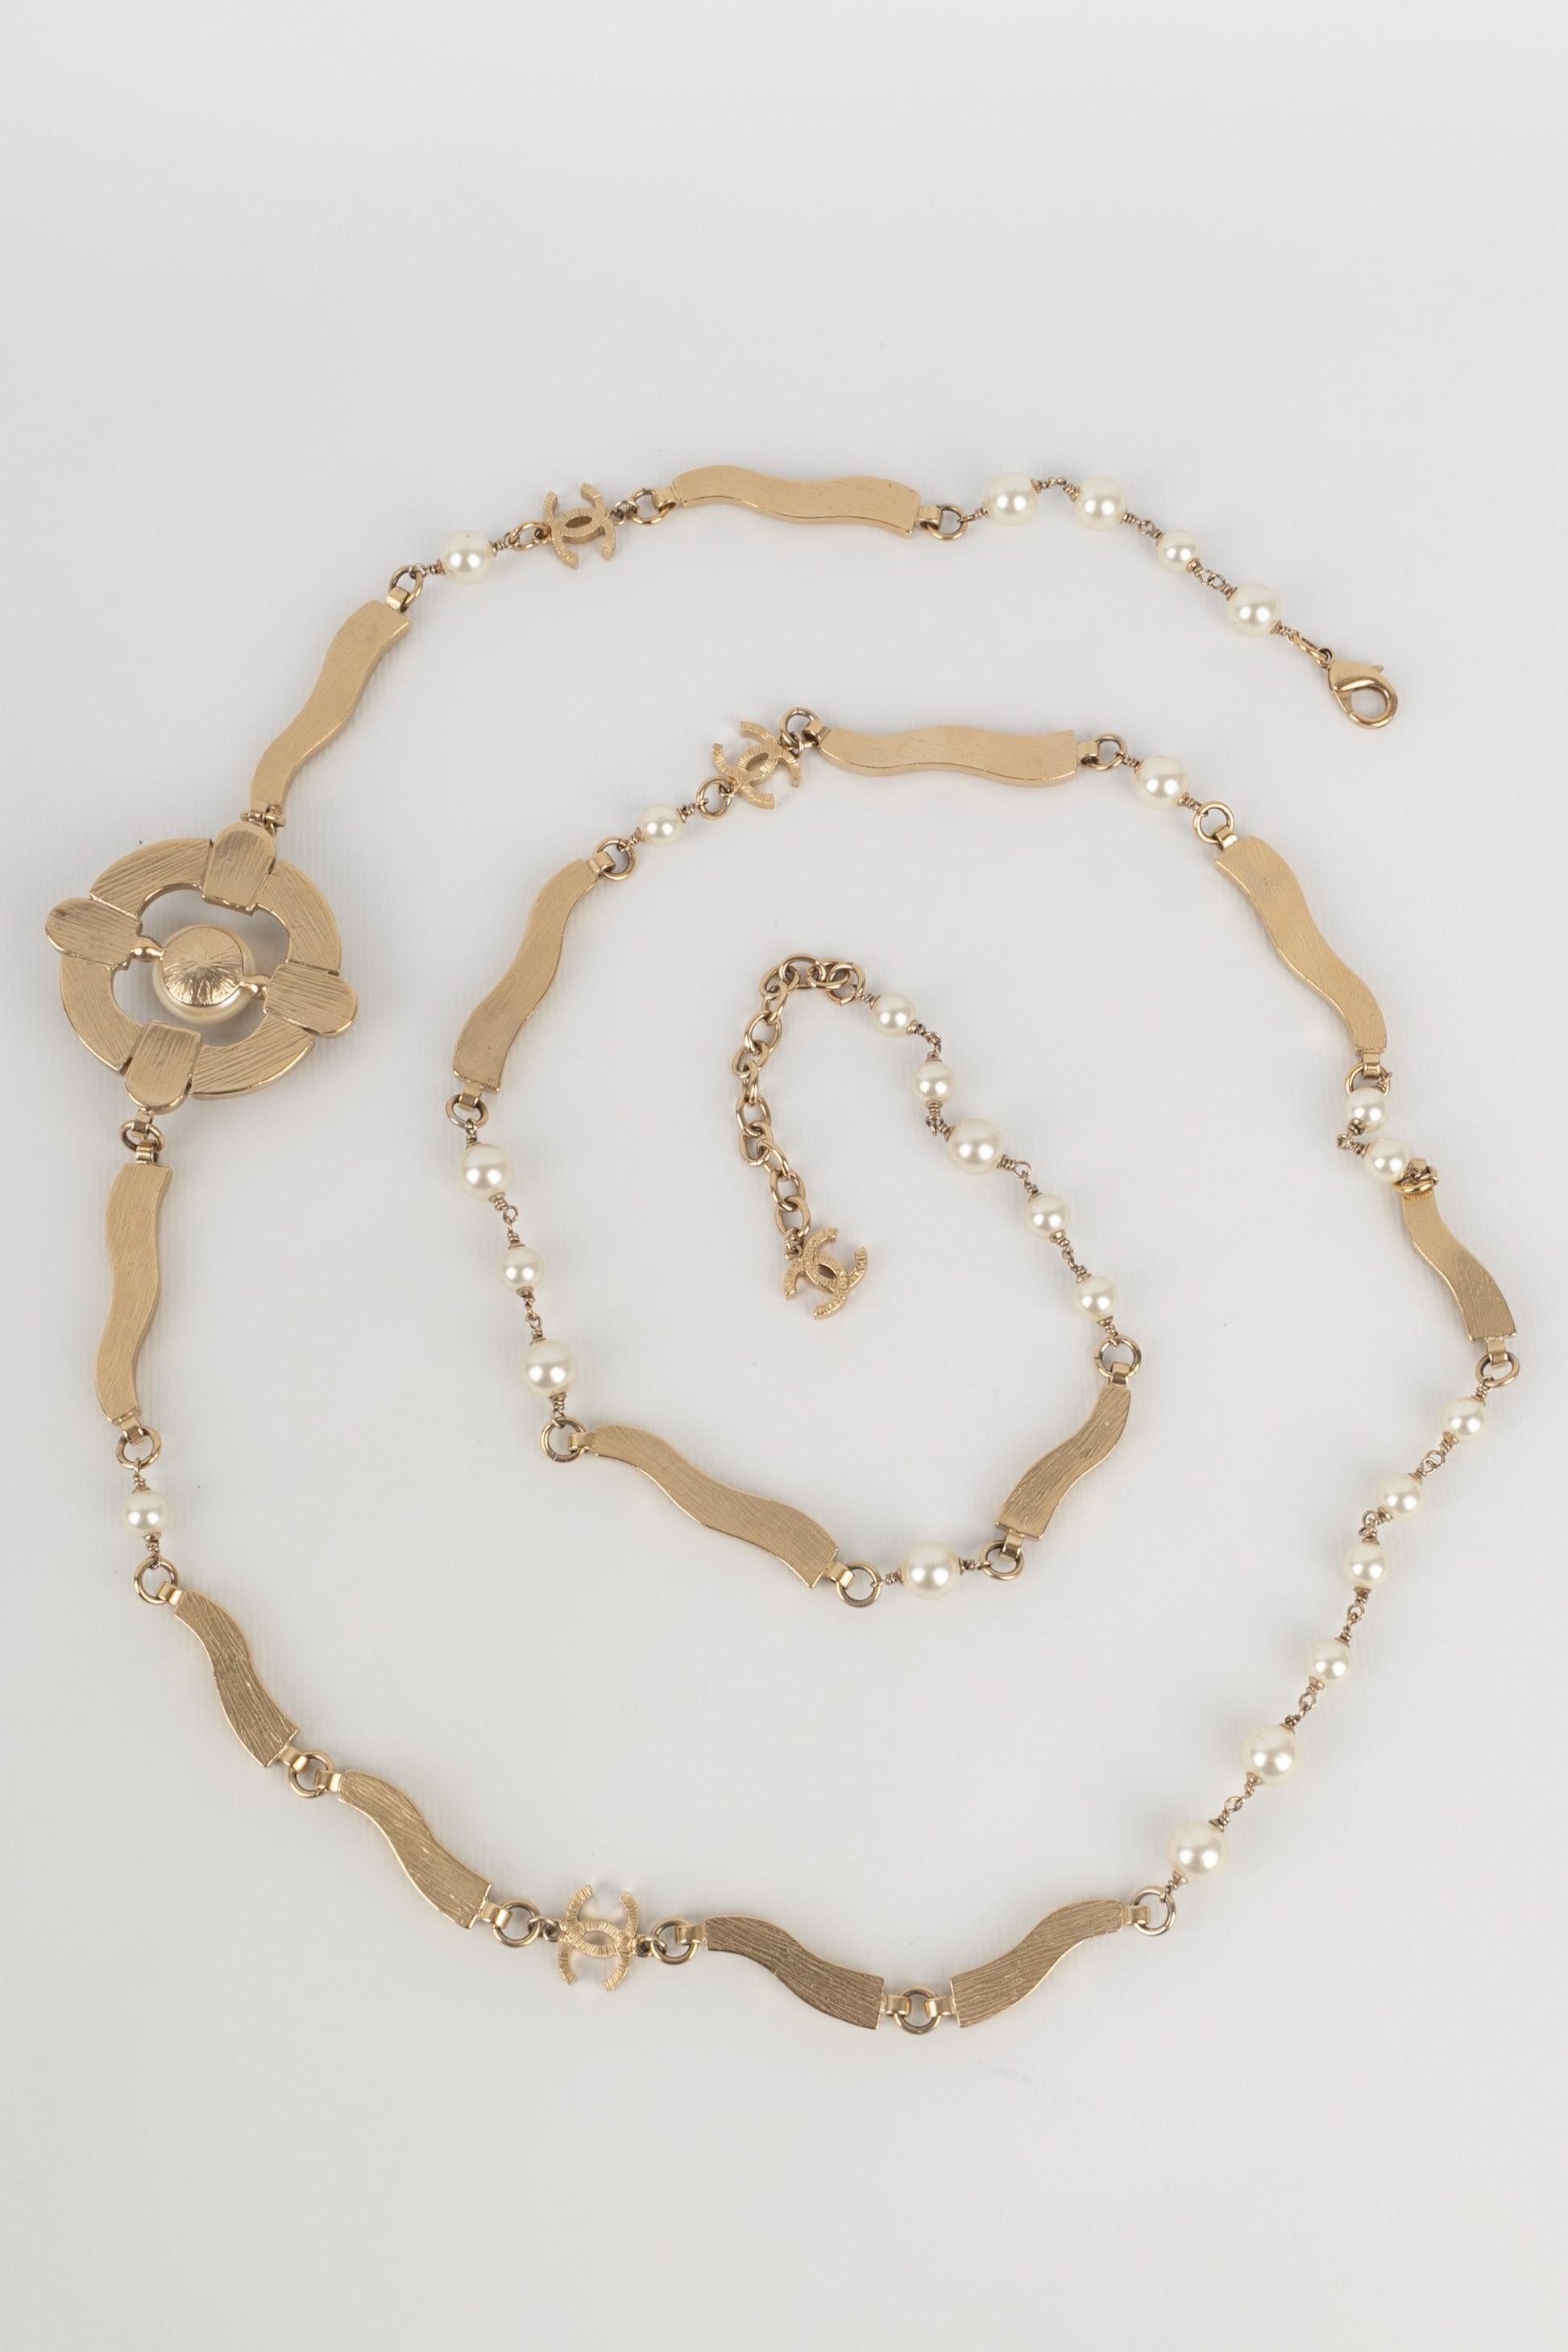 Chanel - (Made in France) Golden metal long necklace wit glass paste and costume pearls. 2007 Collection.

Additional information:
Condition: Very good condition
Dimensions: Length: from 130 cm to 140 cm
Period: 21st Century

Seller Reference: CB140